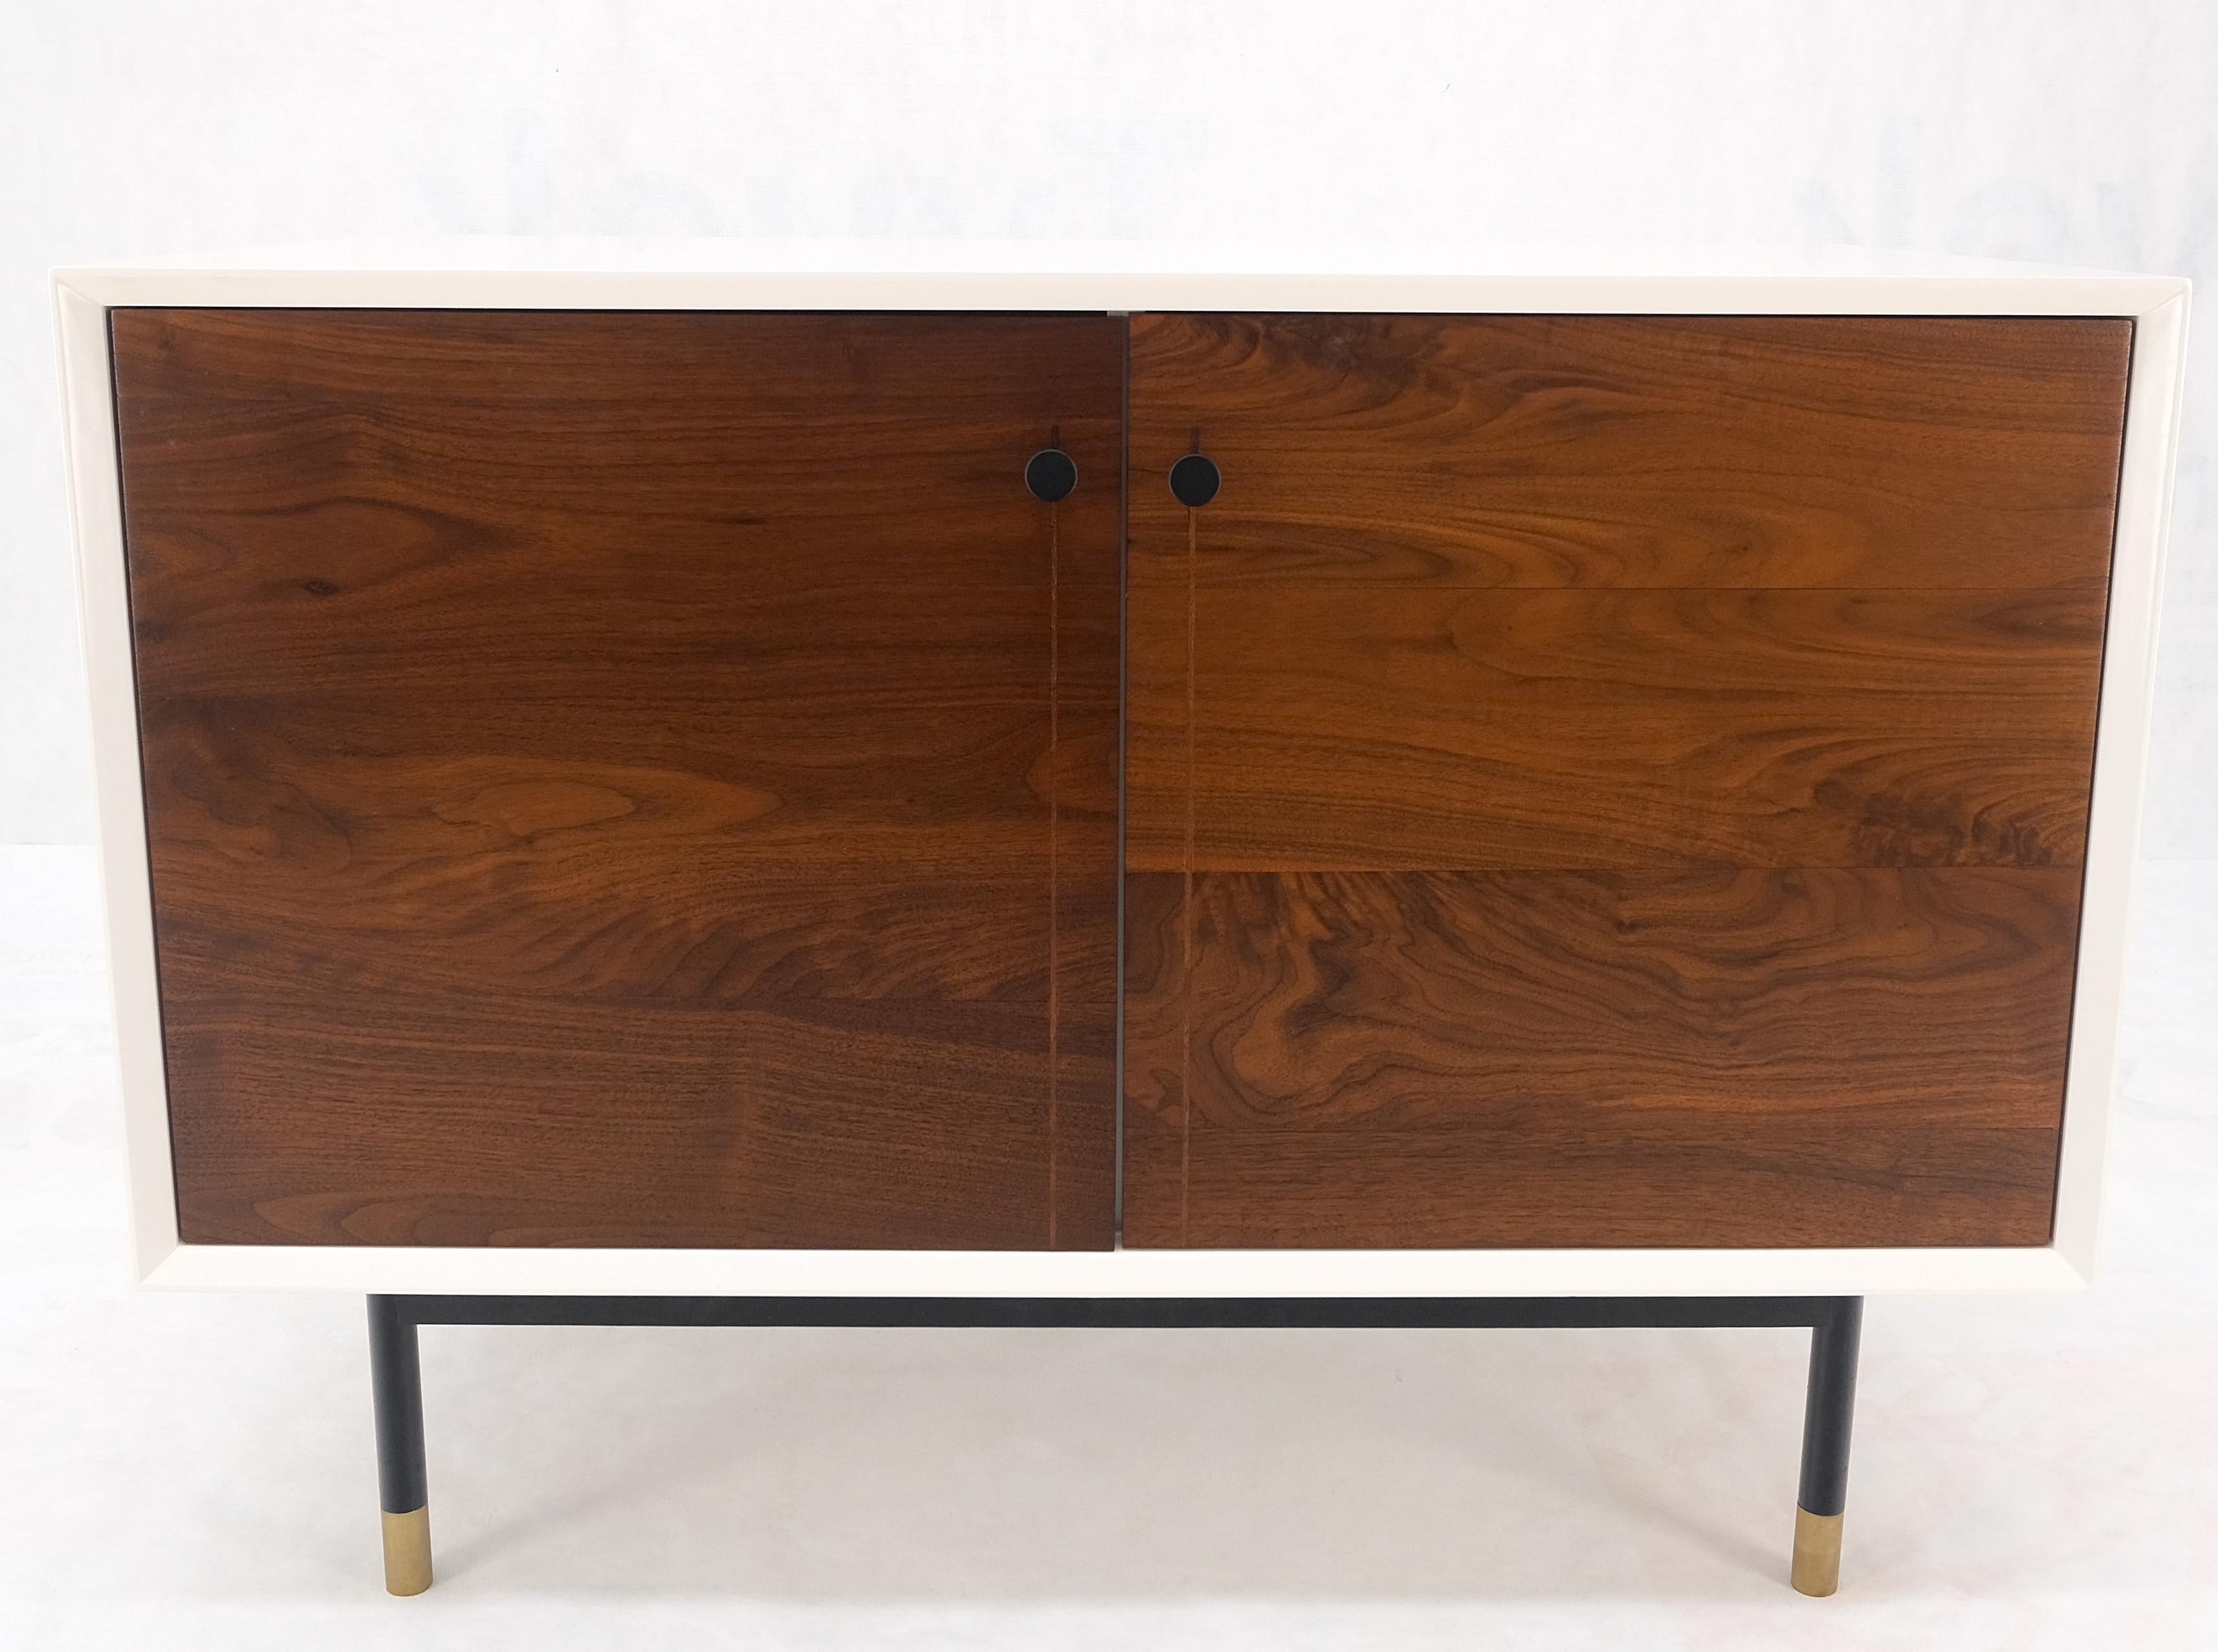 Lacquered White Lacquer Oiled Walnut Double Door Cylinder Legs Brass Tips Legs Credenza For Sale